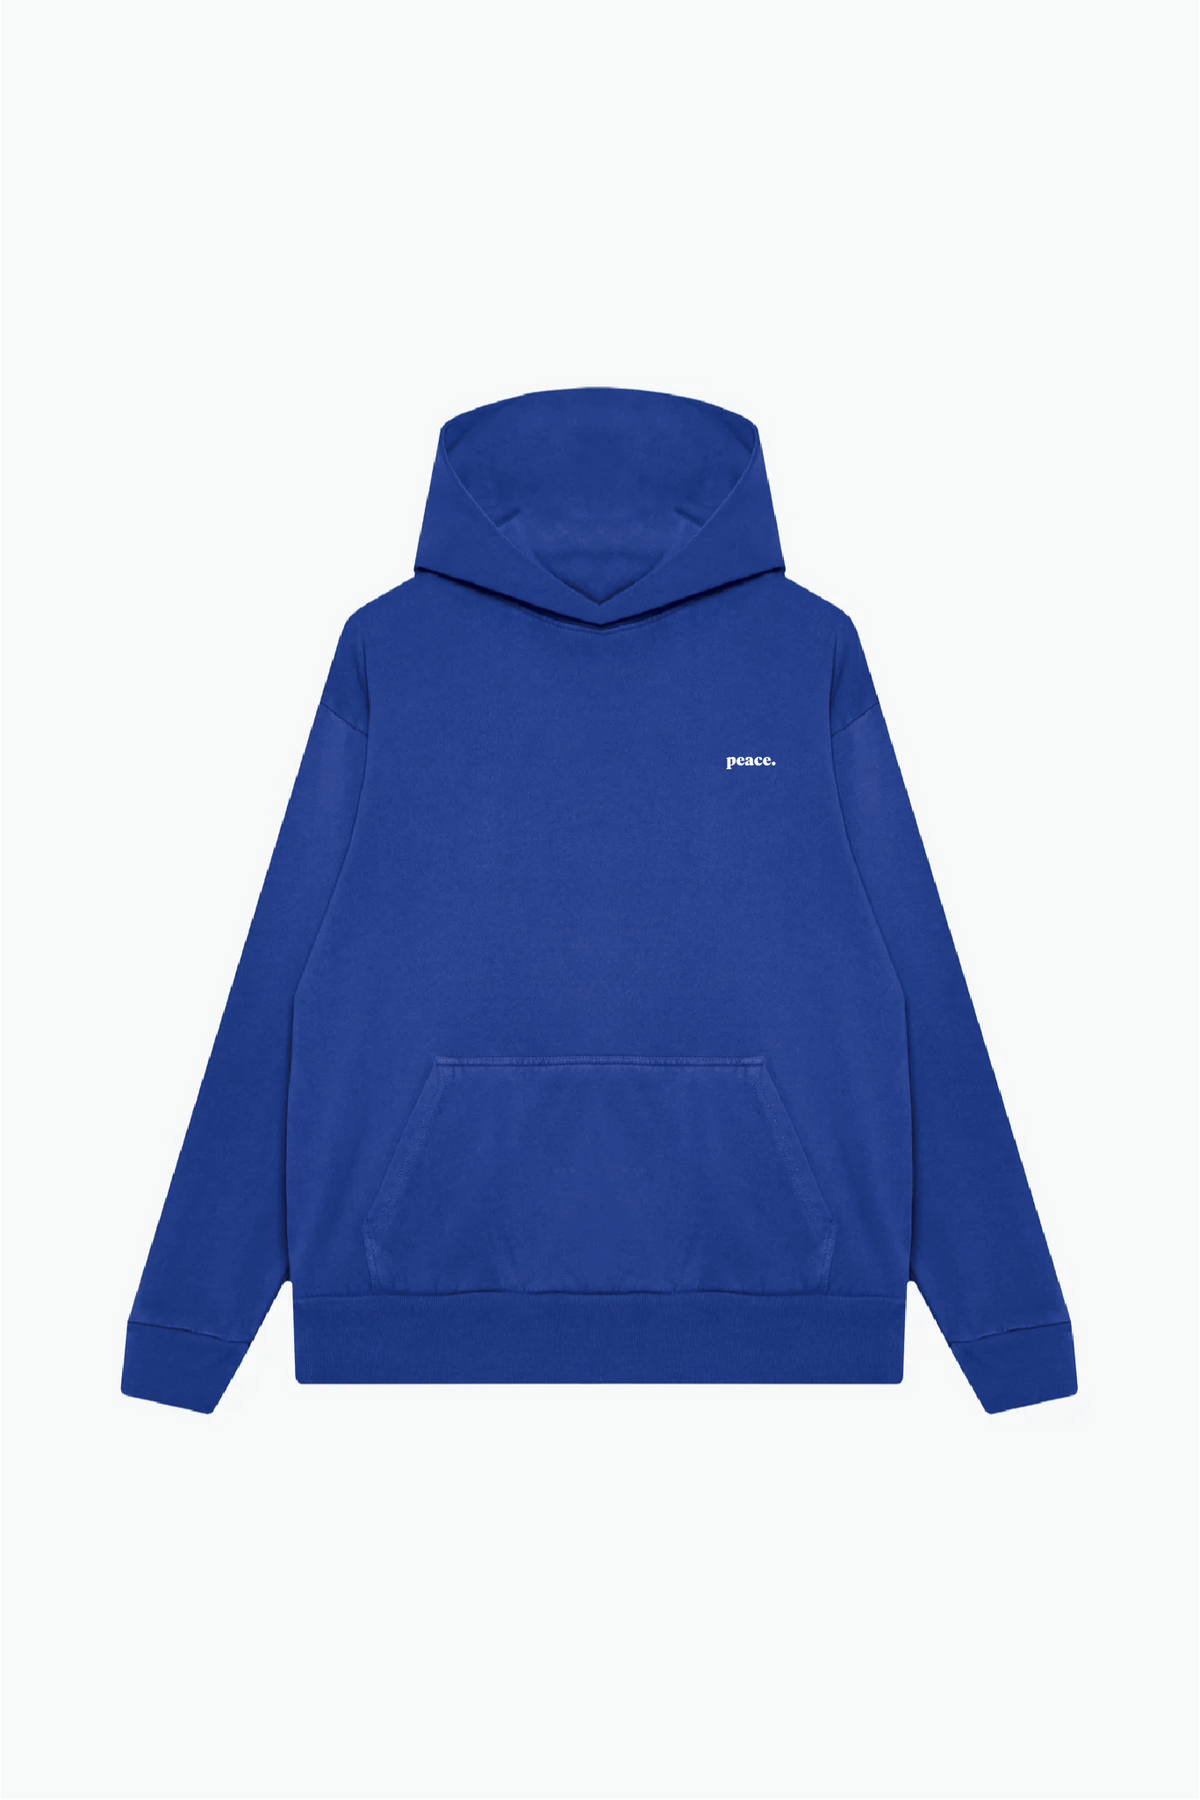 Peace Heavyweight Hoodie - Strong Blue